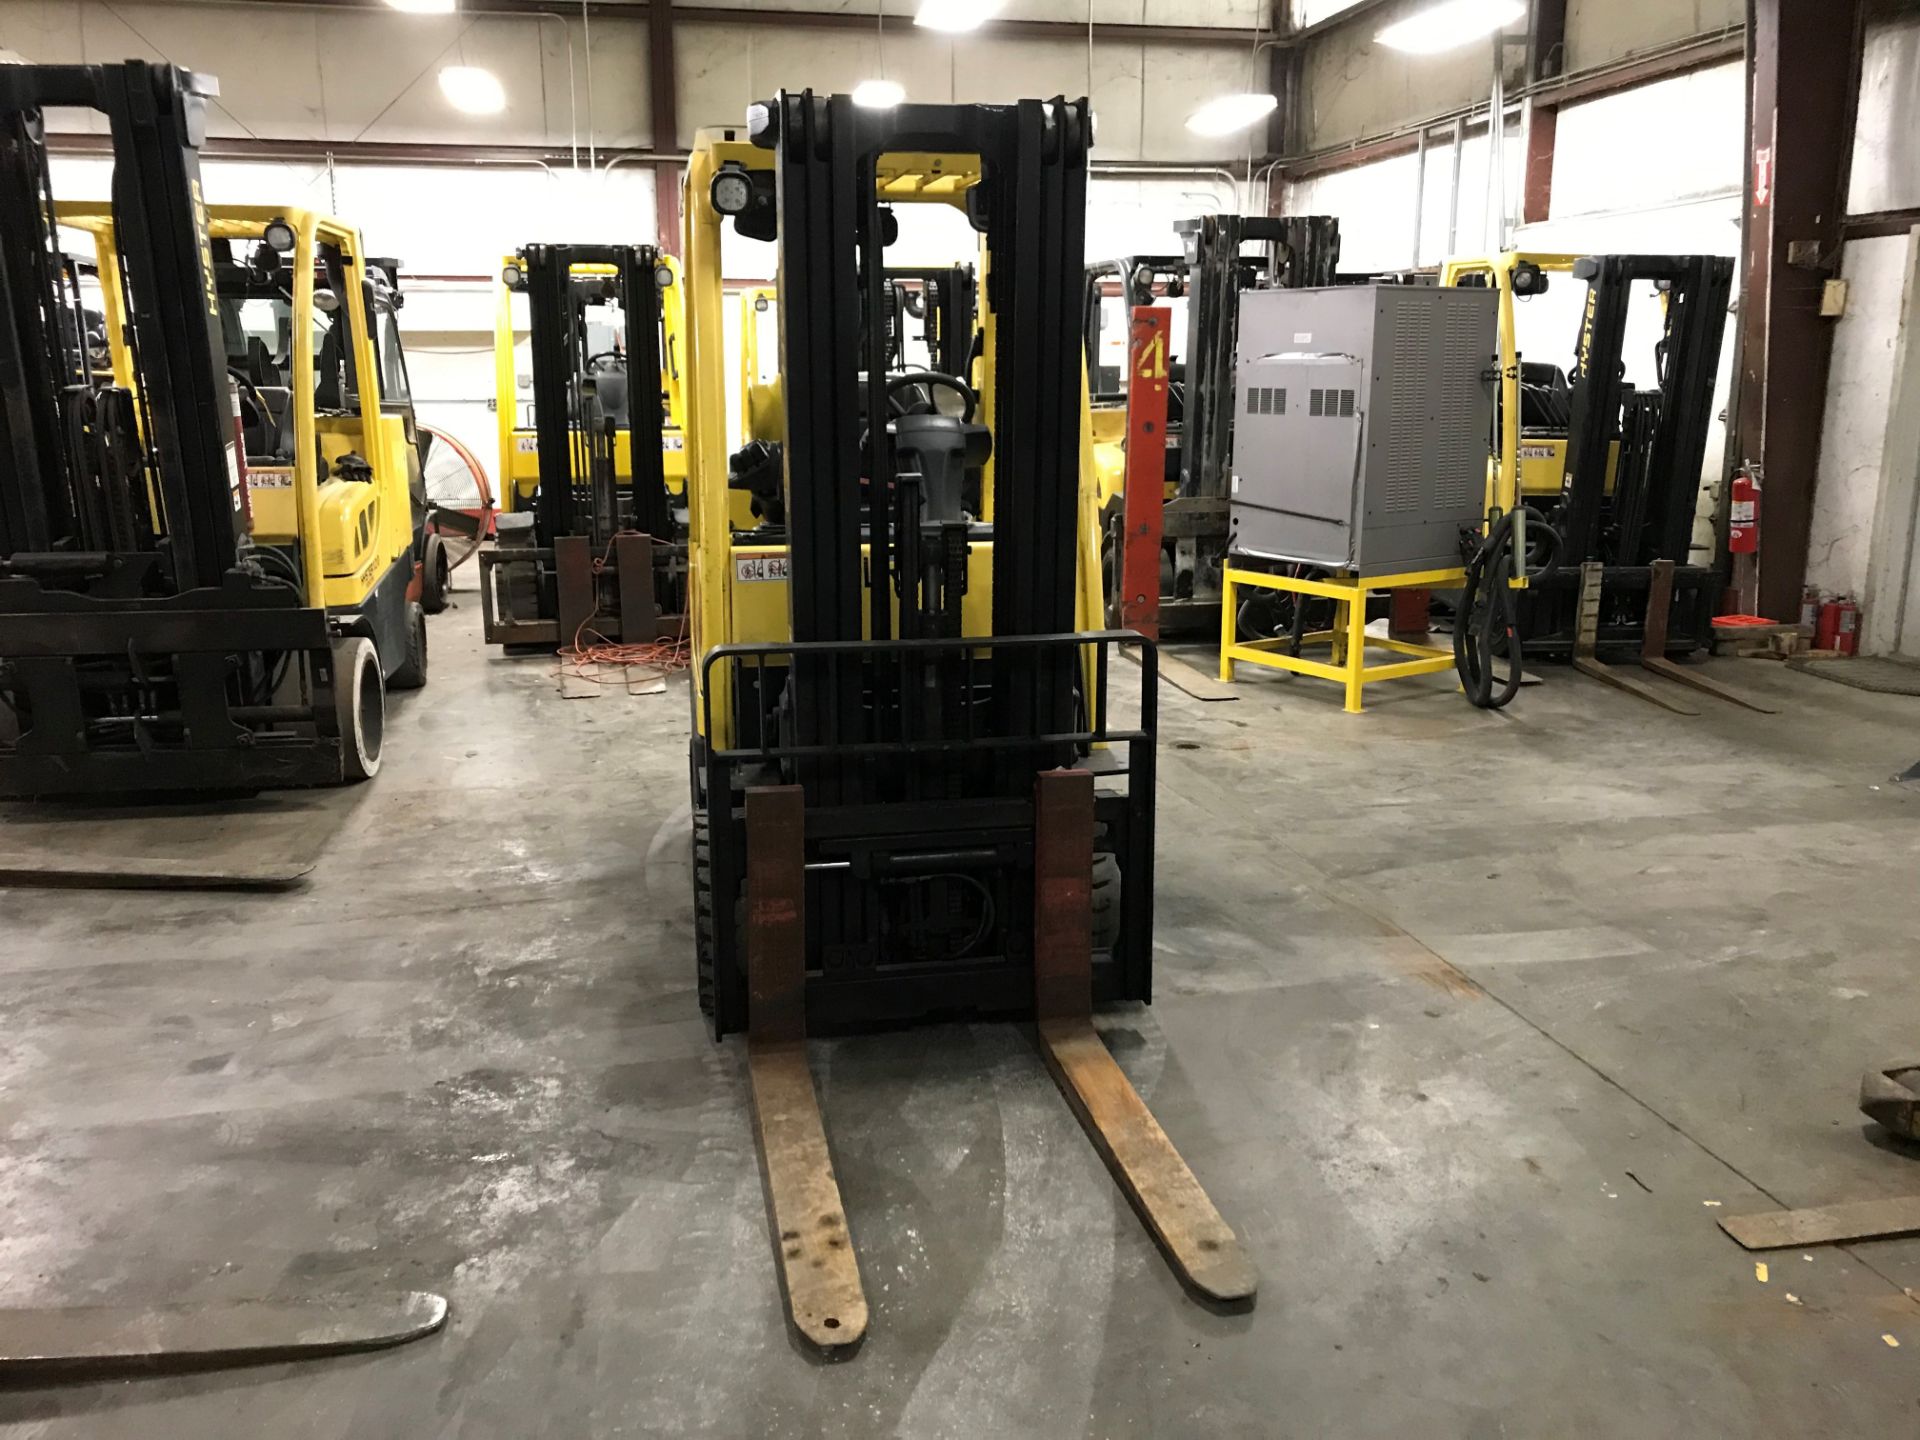 2011 HYSTER 6,000-LB. FORKLIFT, MODEL S60FT, 13,708 HOURS, 3-STAGE MAST, CUSHION TIRES - Image 2 of 5